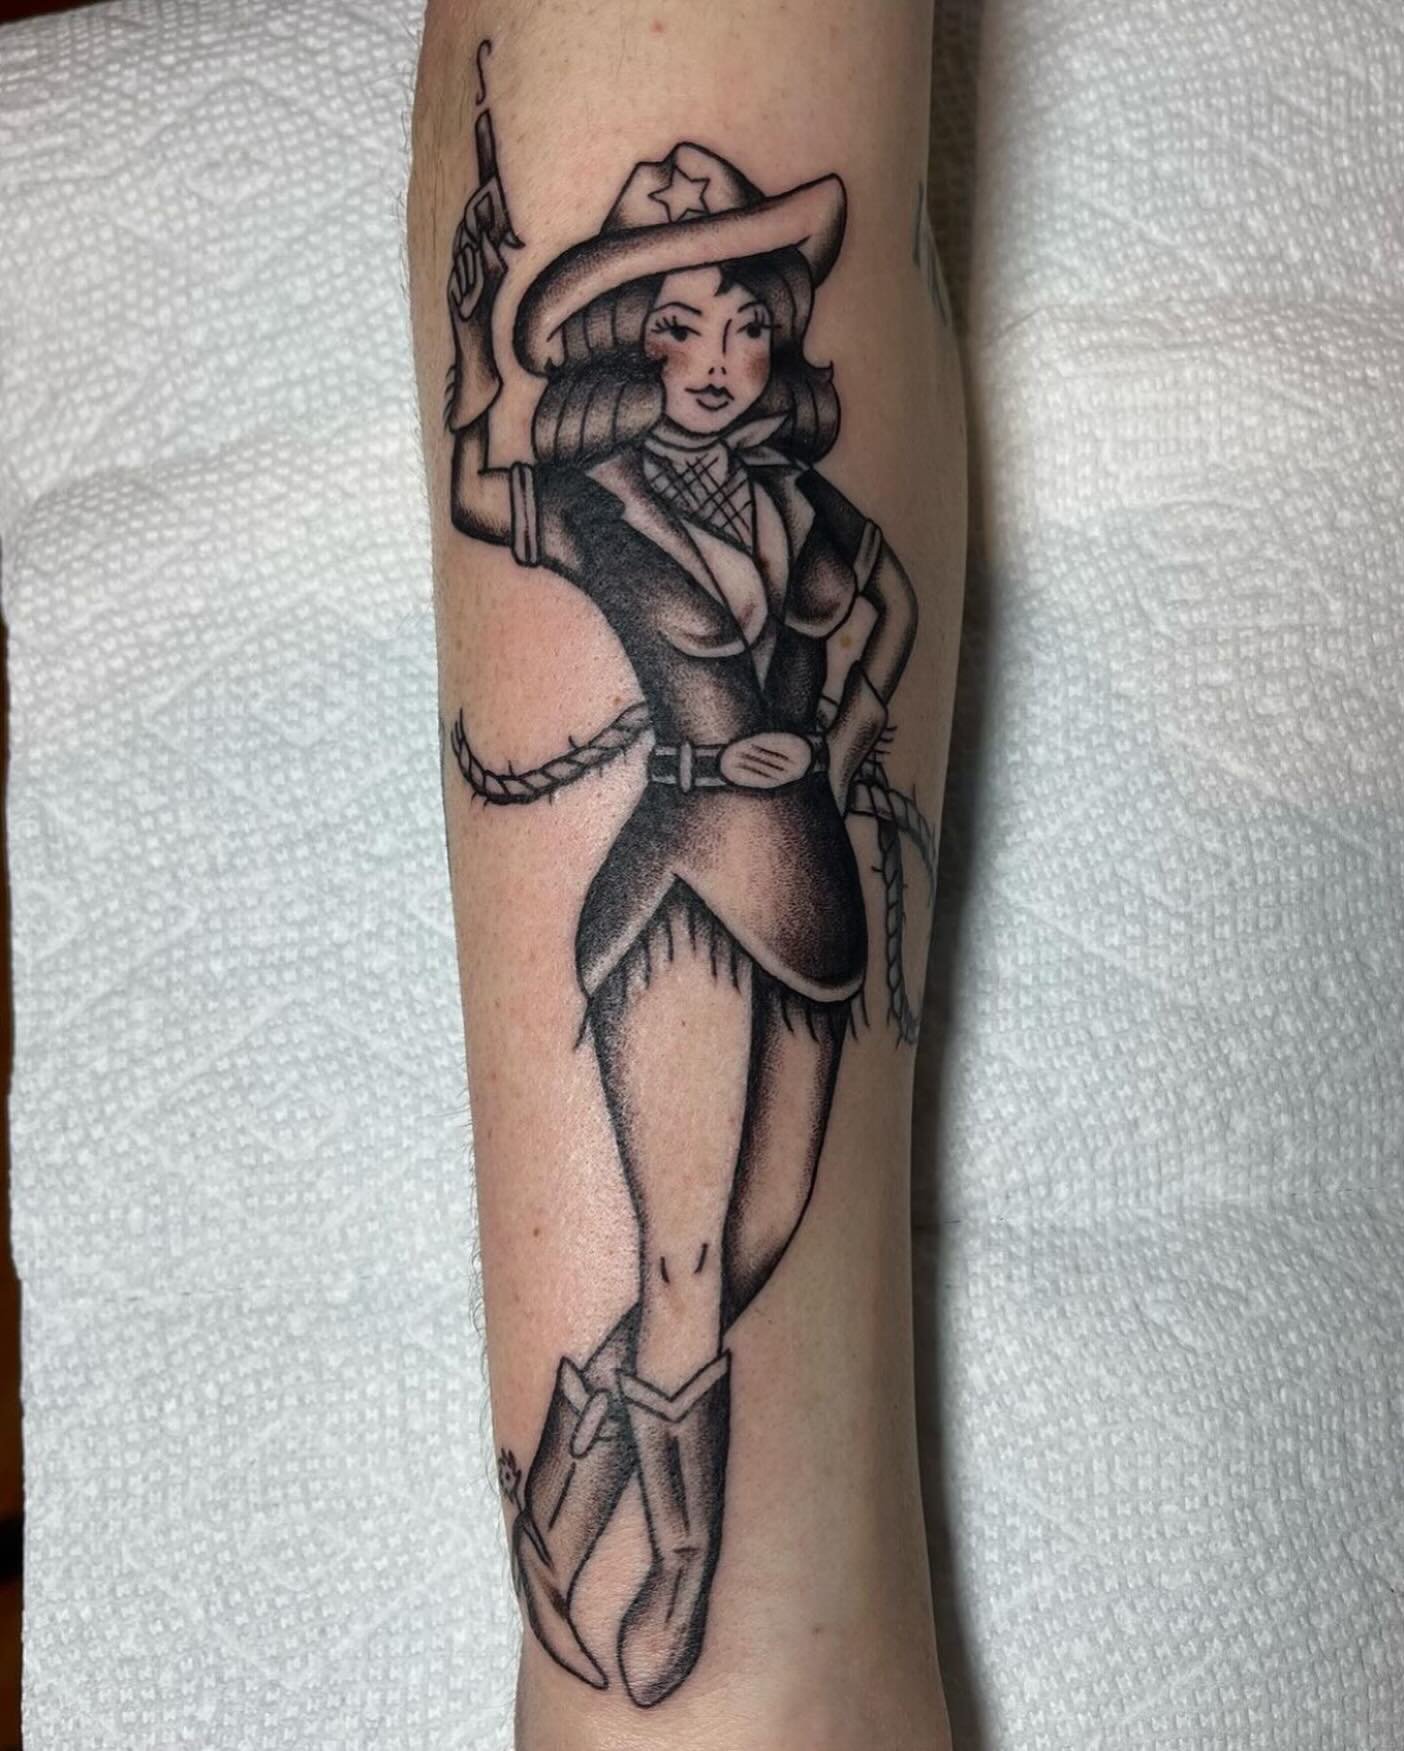 Pinup by @sknapp_ink @twosonstattoo we take walk-ins daily and book appointments! Open Mon-Sat 12-8. Real tattooing in Cleveland&rsquo;s favorite street shop!